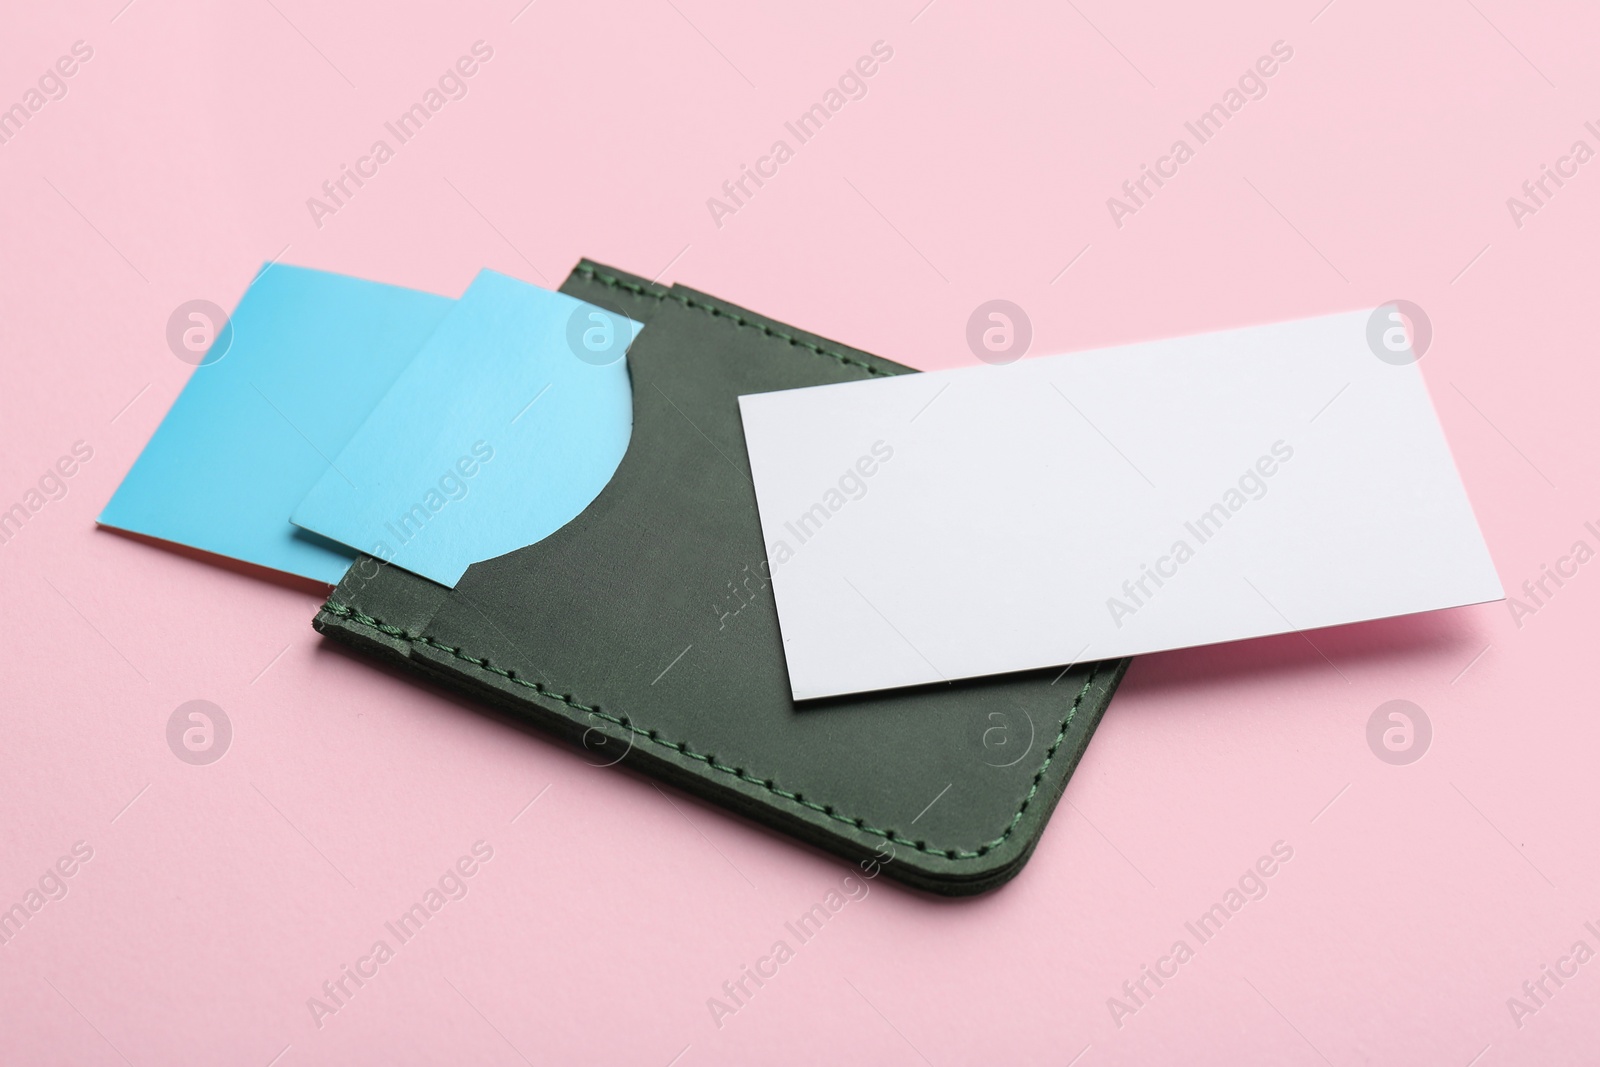 Photo of Leather business card holder with blank cards on pink background